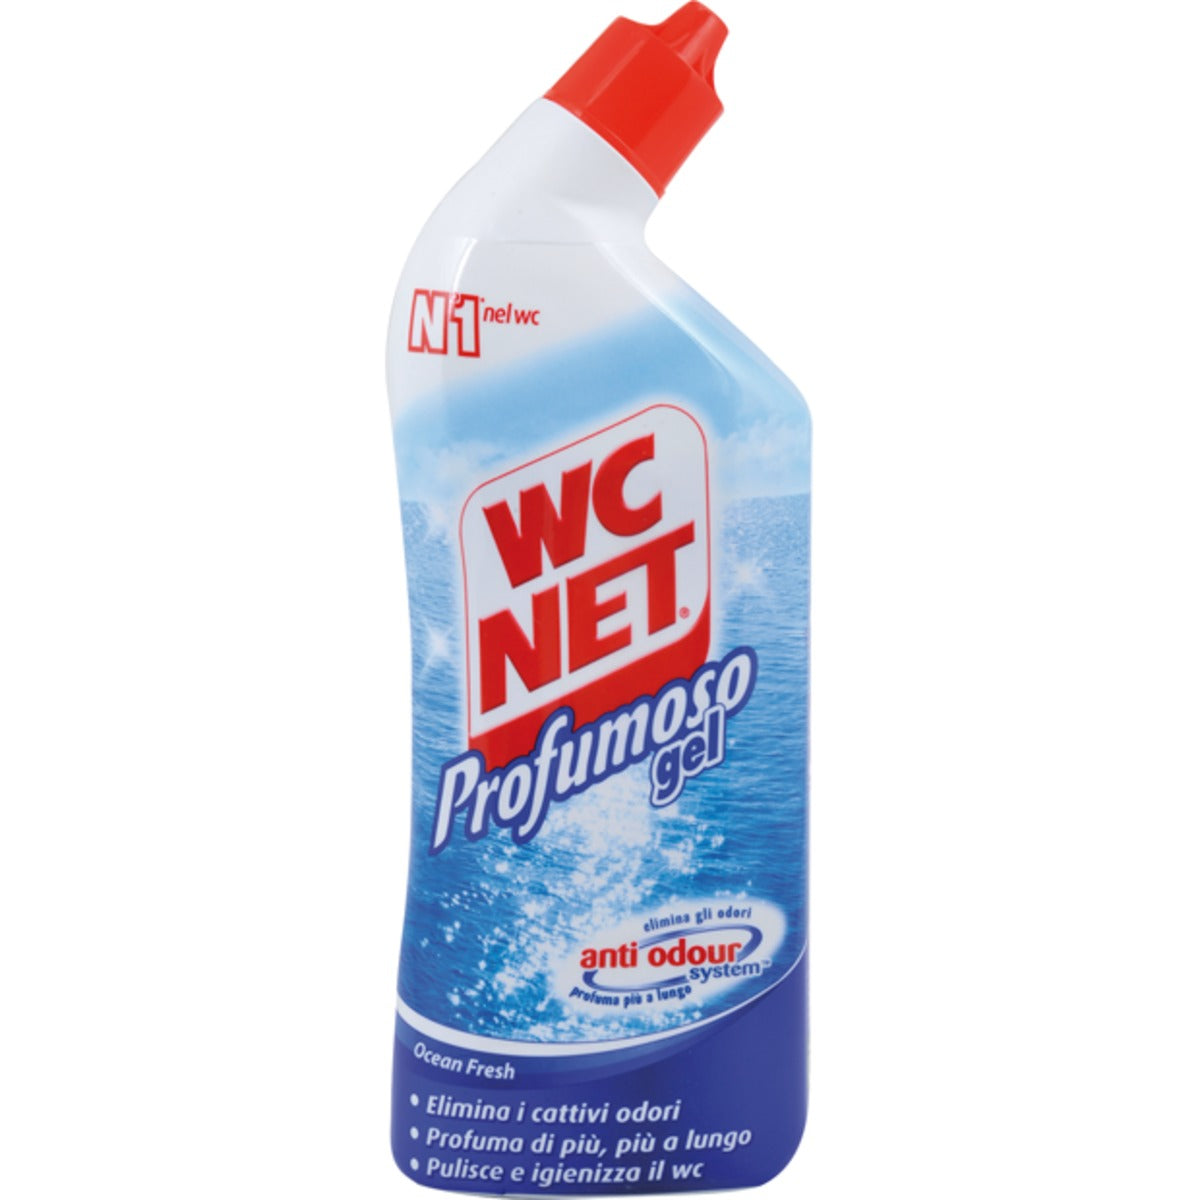 WC Net Toilet Cleaning Detergent